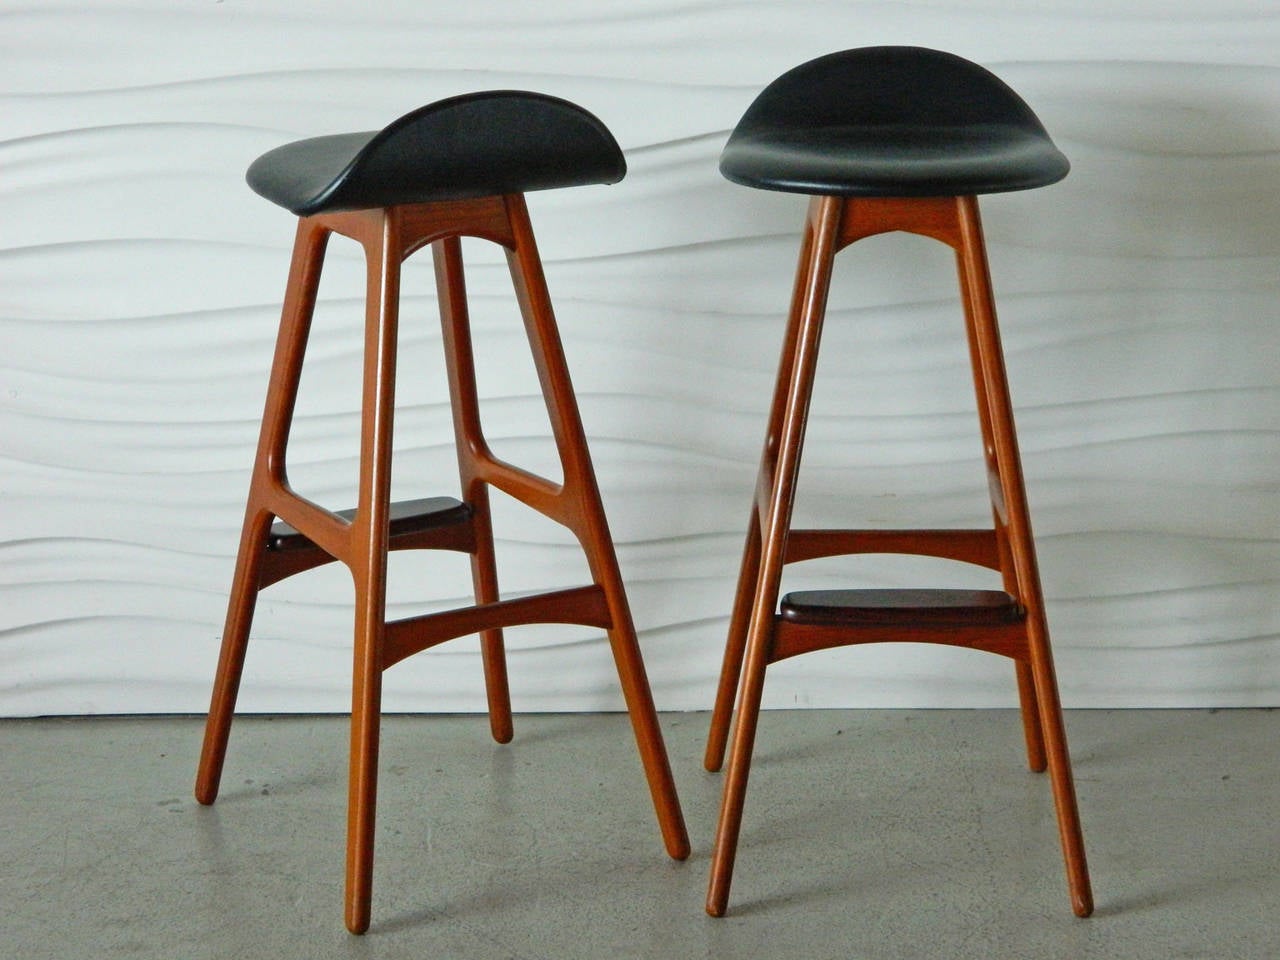 This gorgeous pair of Eric Buck teak stools has rosewood foot rests and black vinyl seats. Made in Denmark.